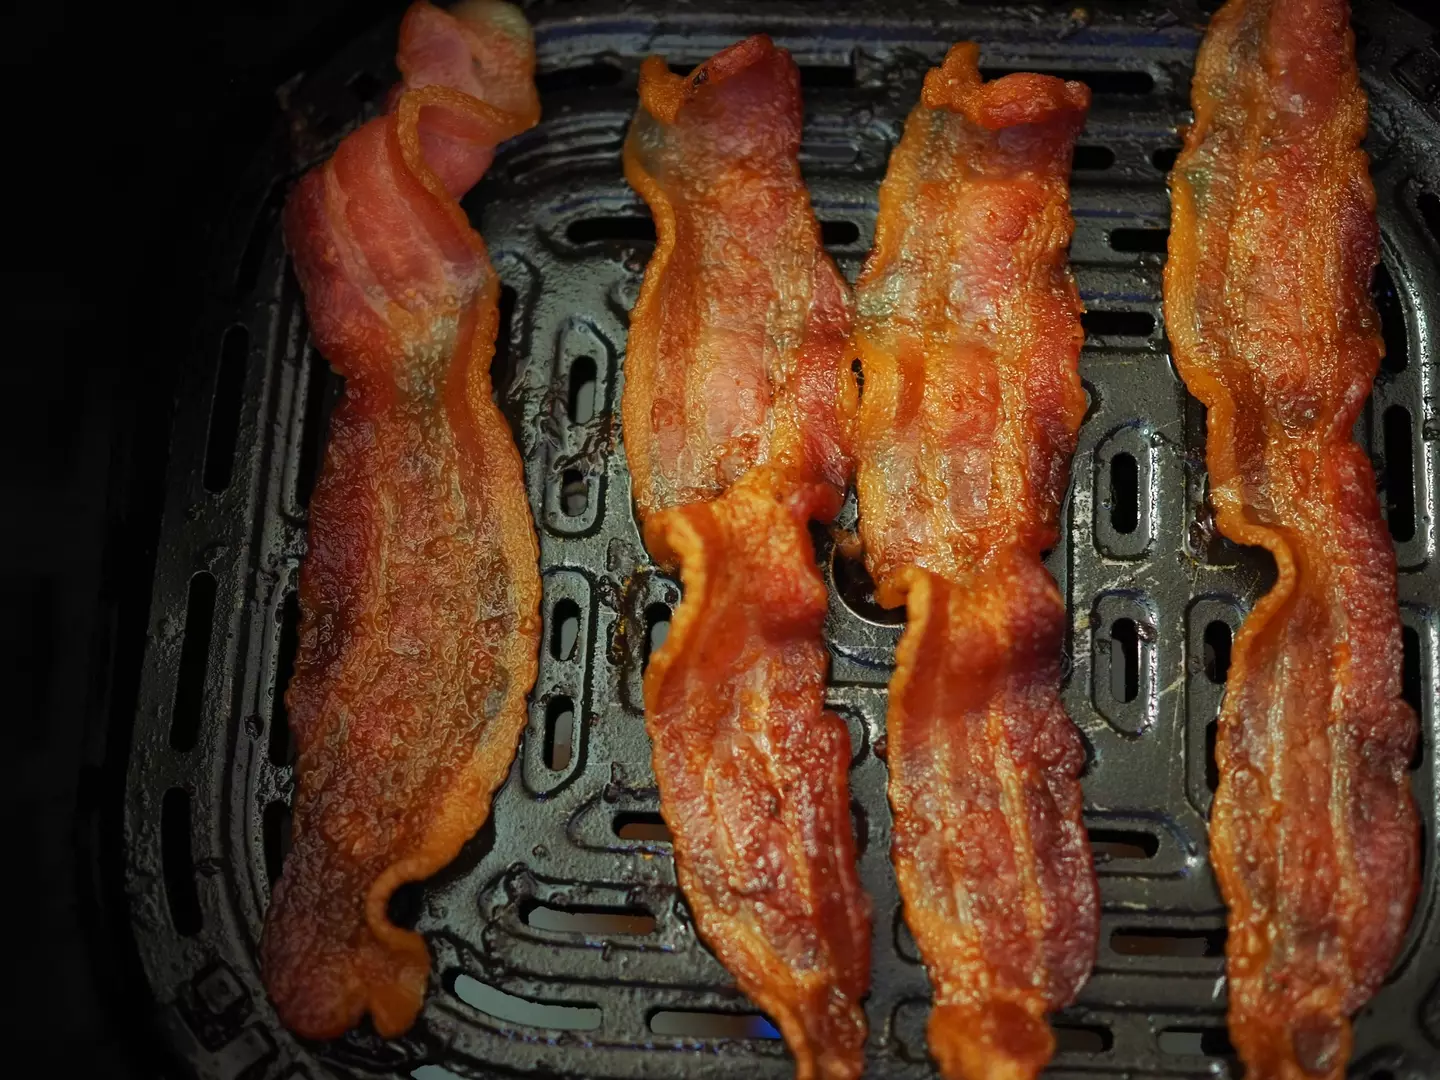 There's a risk bacon will cook unevenly. (Getty Stock Image)